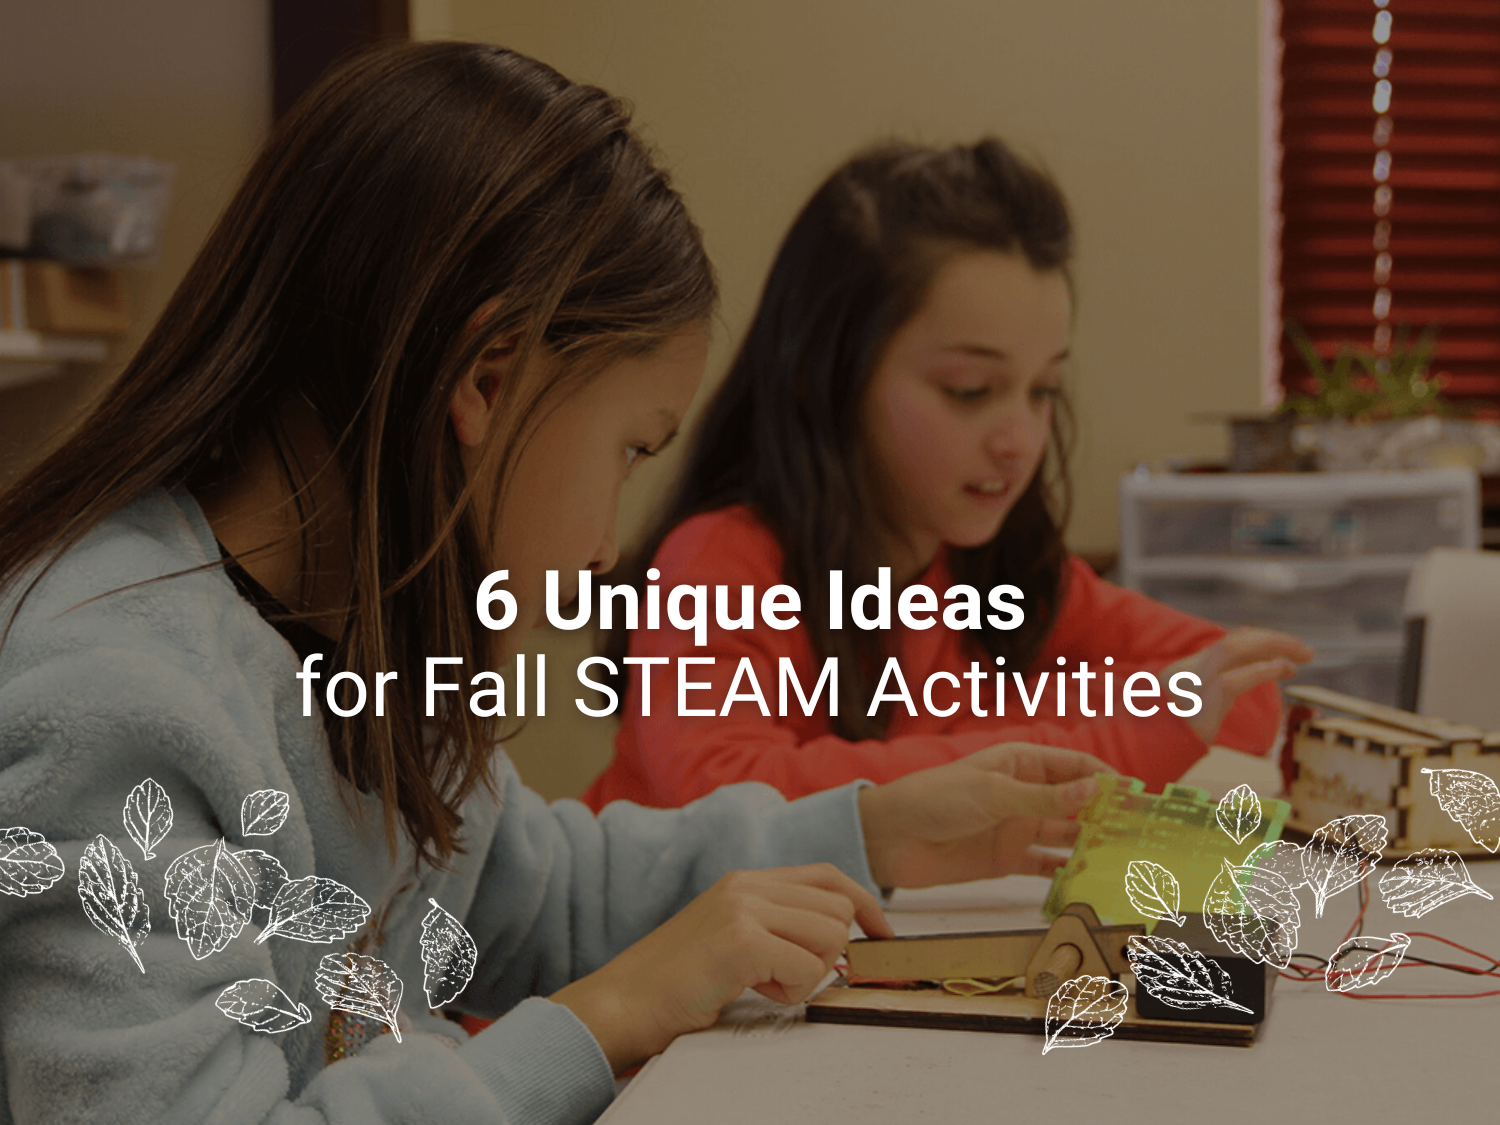 6 Unique Ideas for Fall STEAM Activities